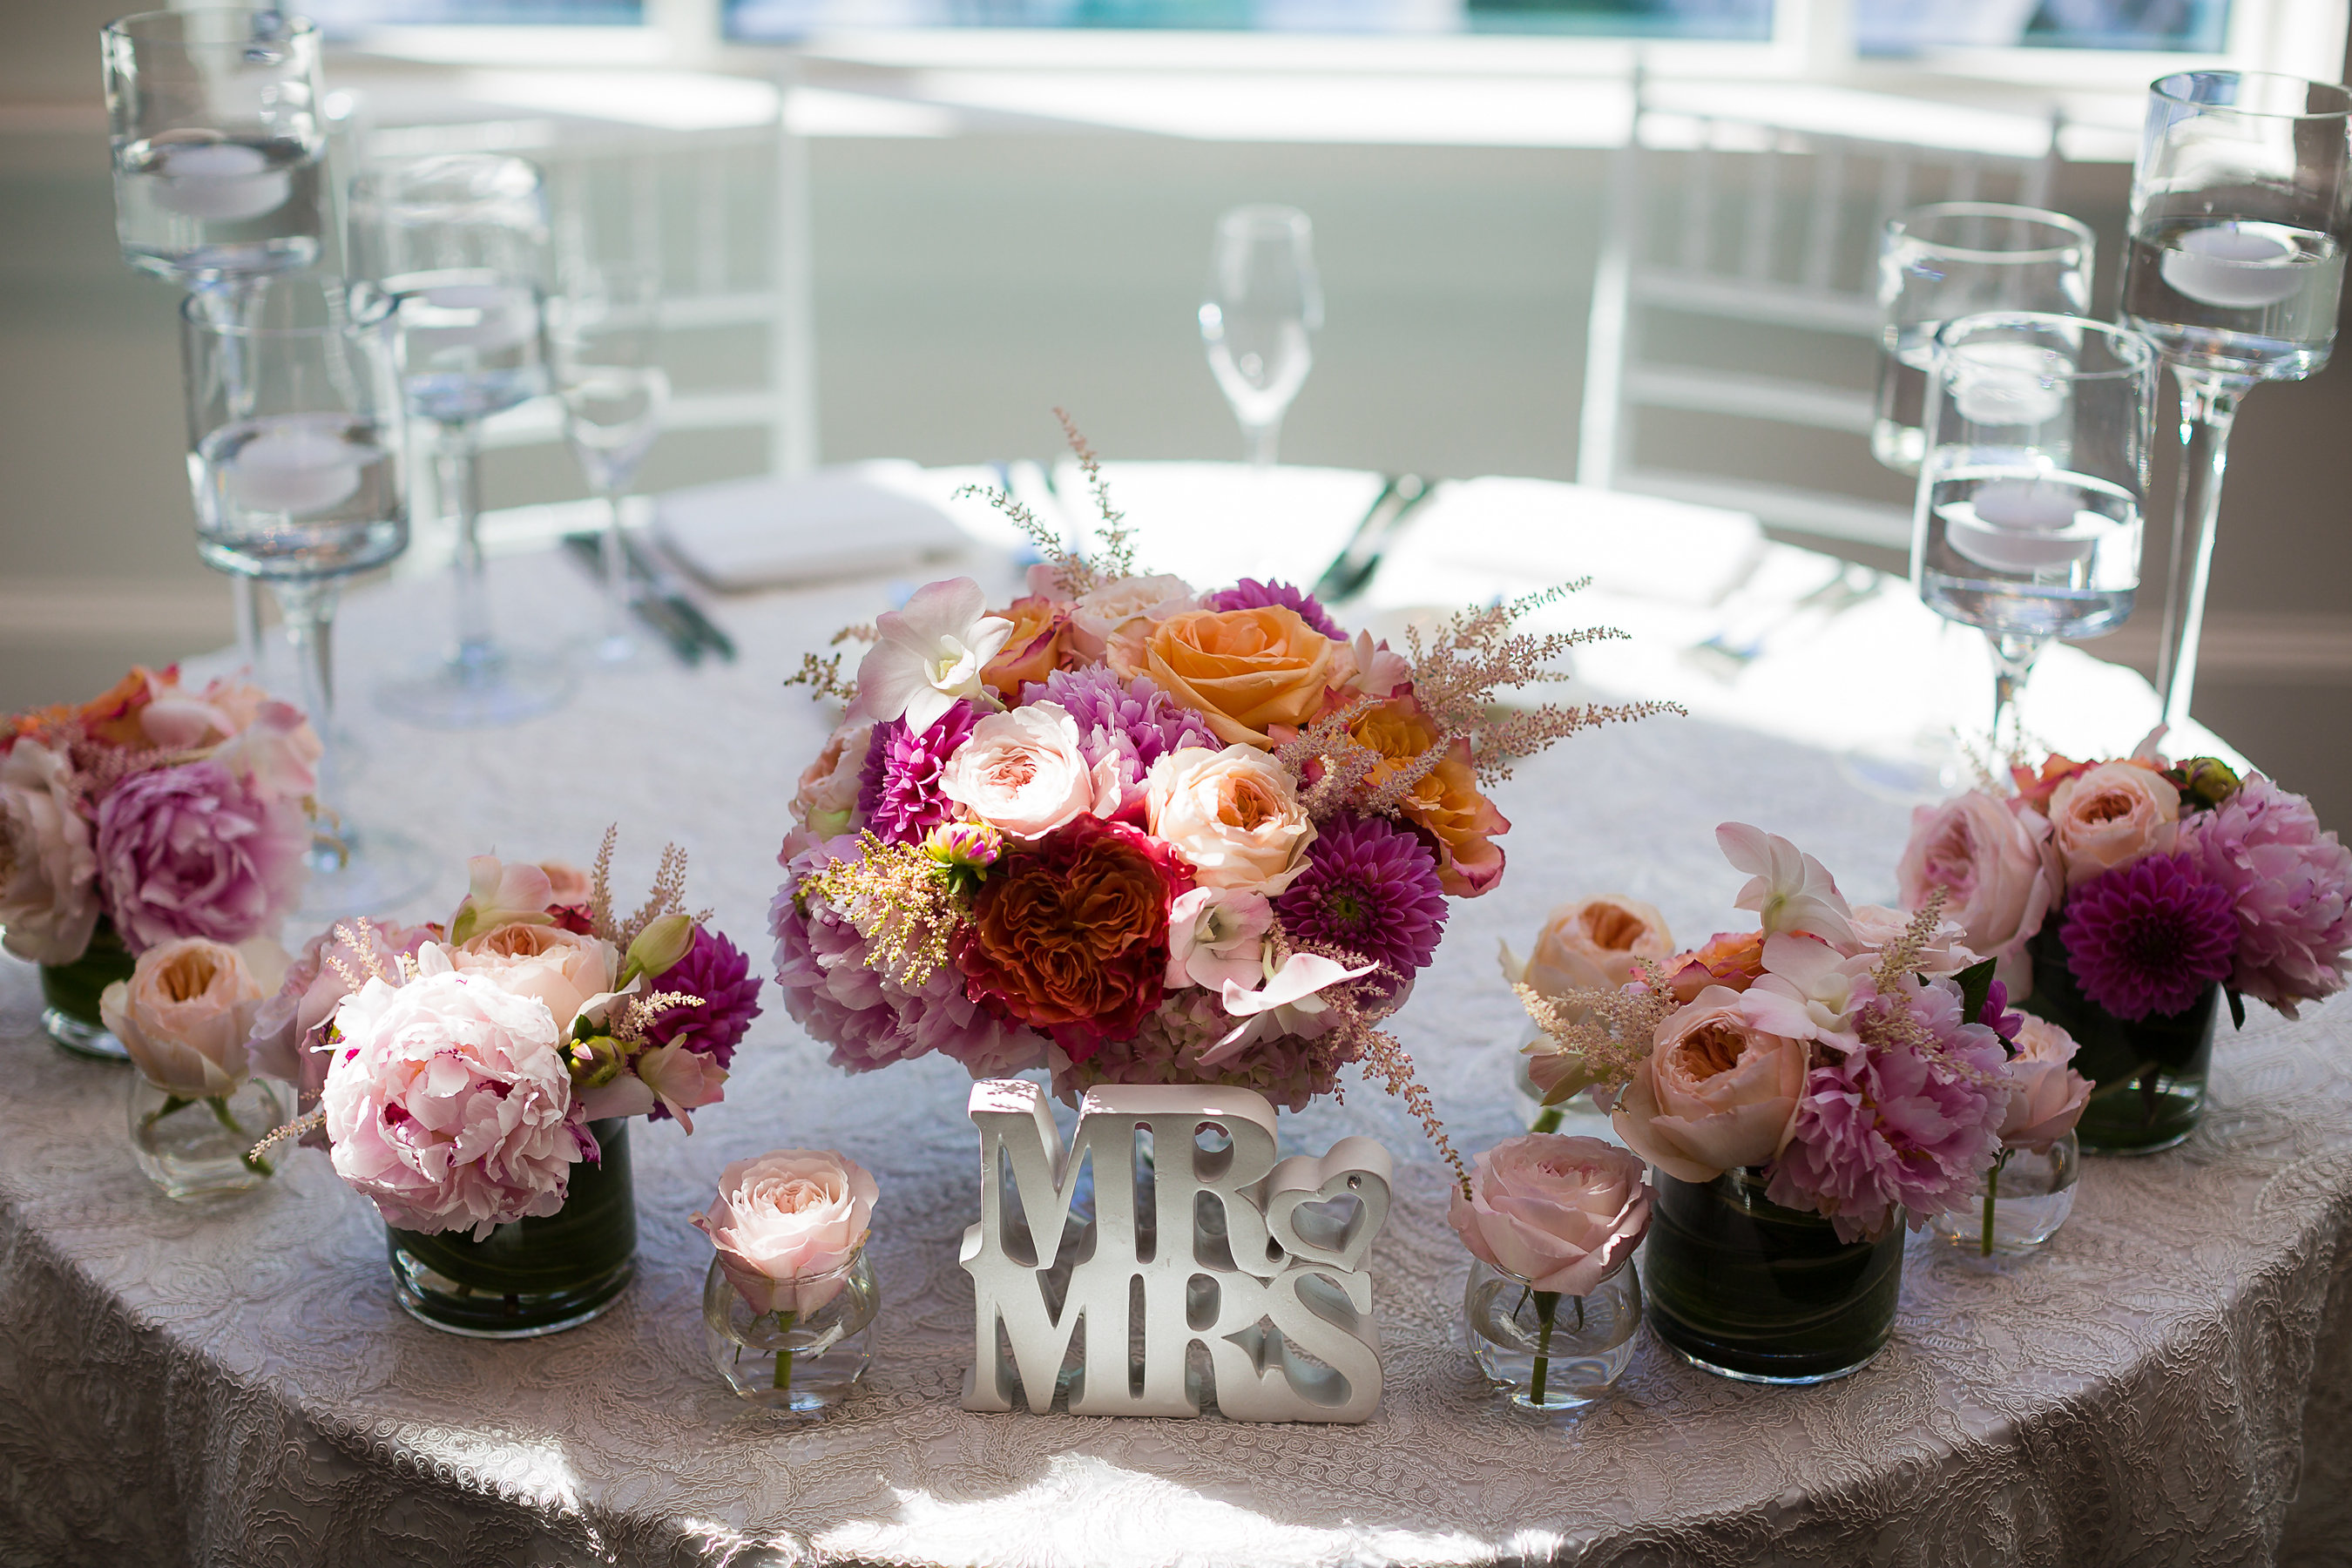 Mr. & Mrs. sweetheart table with summer color palette flowers